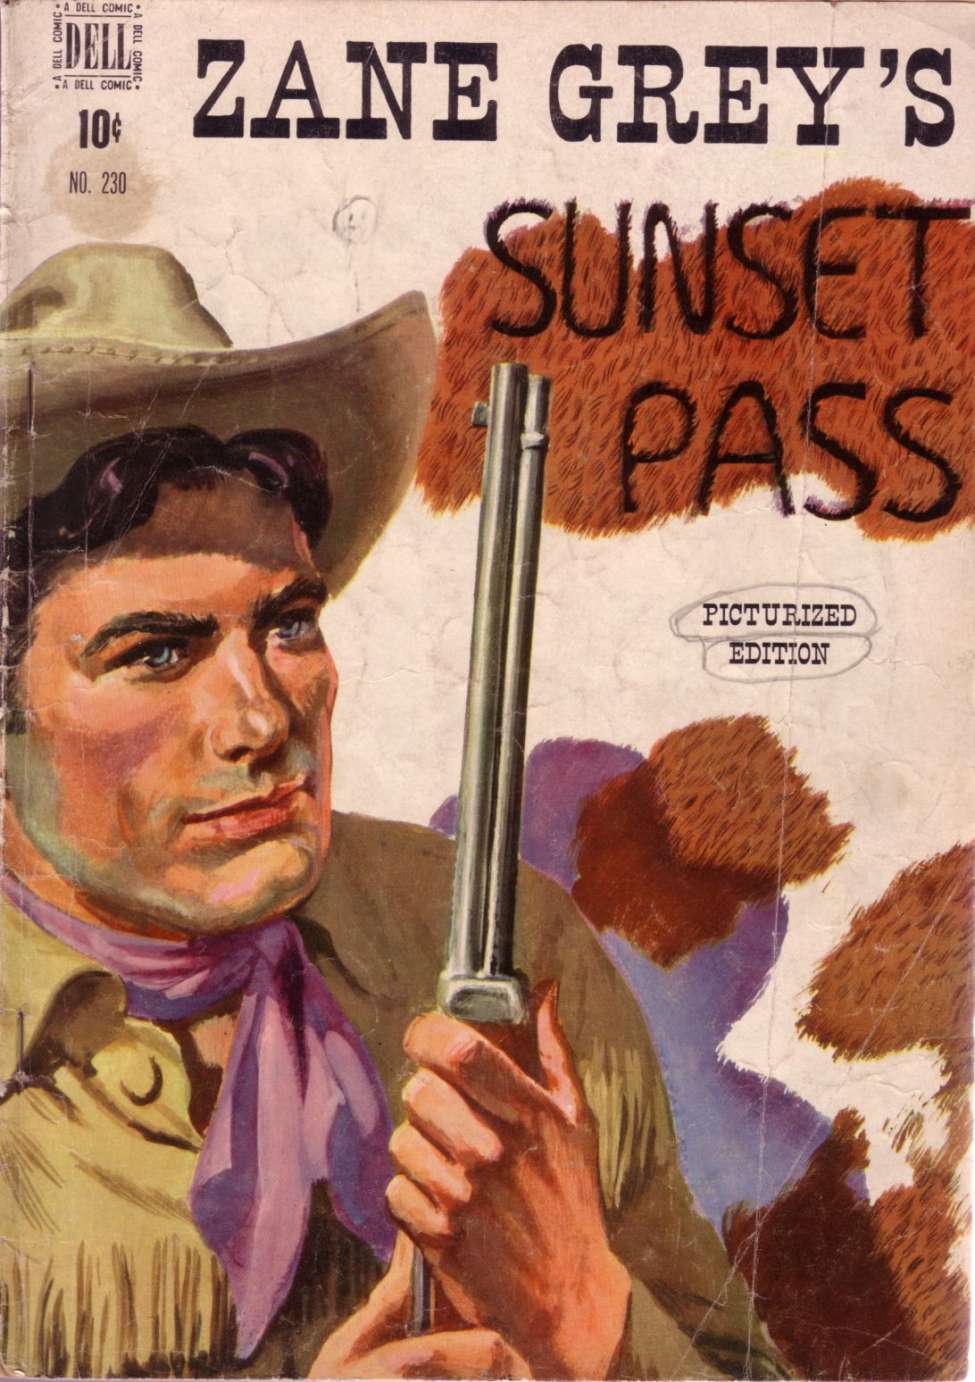 Comic Book Cover For 0230 - Zane Grey's Sunset Pass